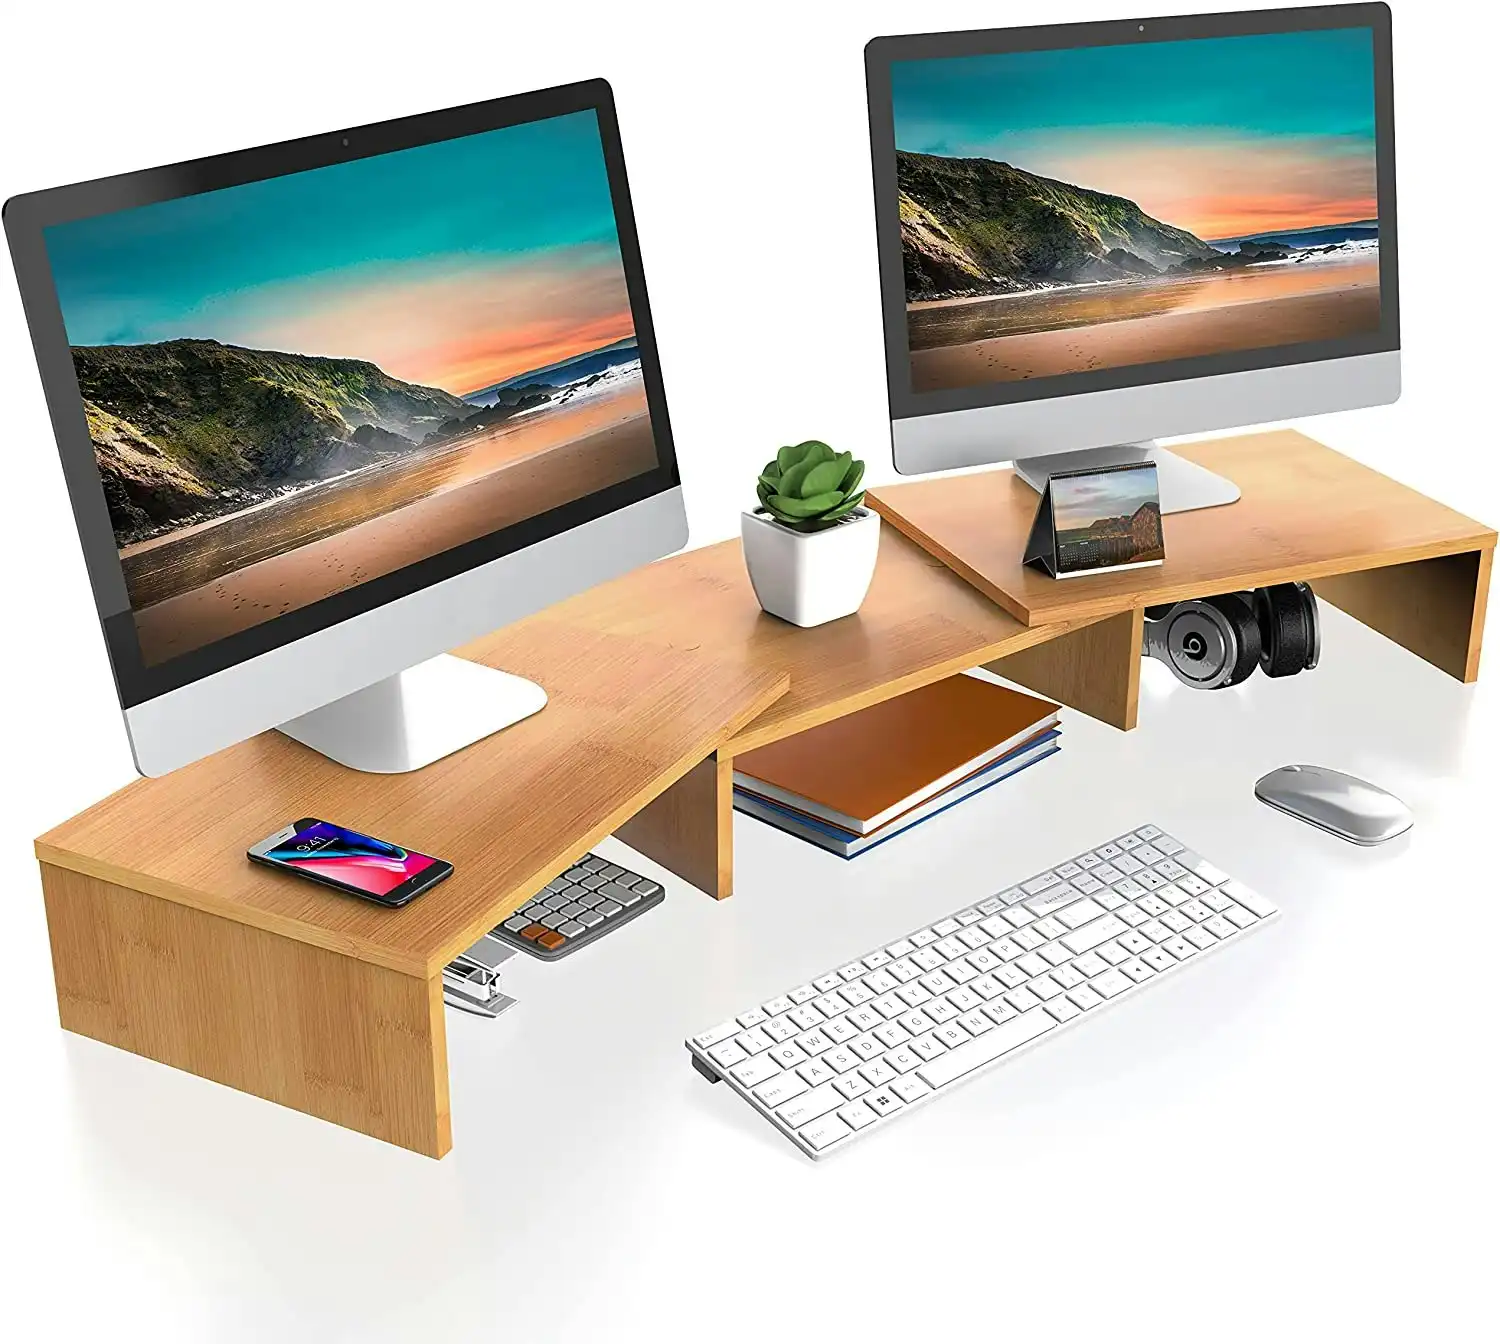 3 x Adjustable Computer monitor stand riser (Bamboo Color)